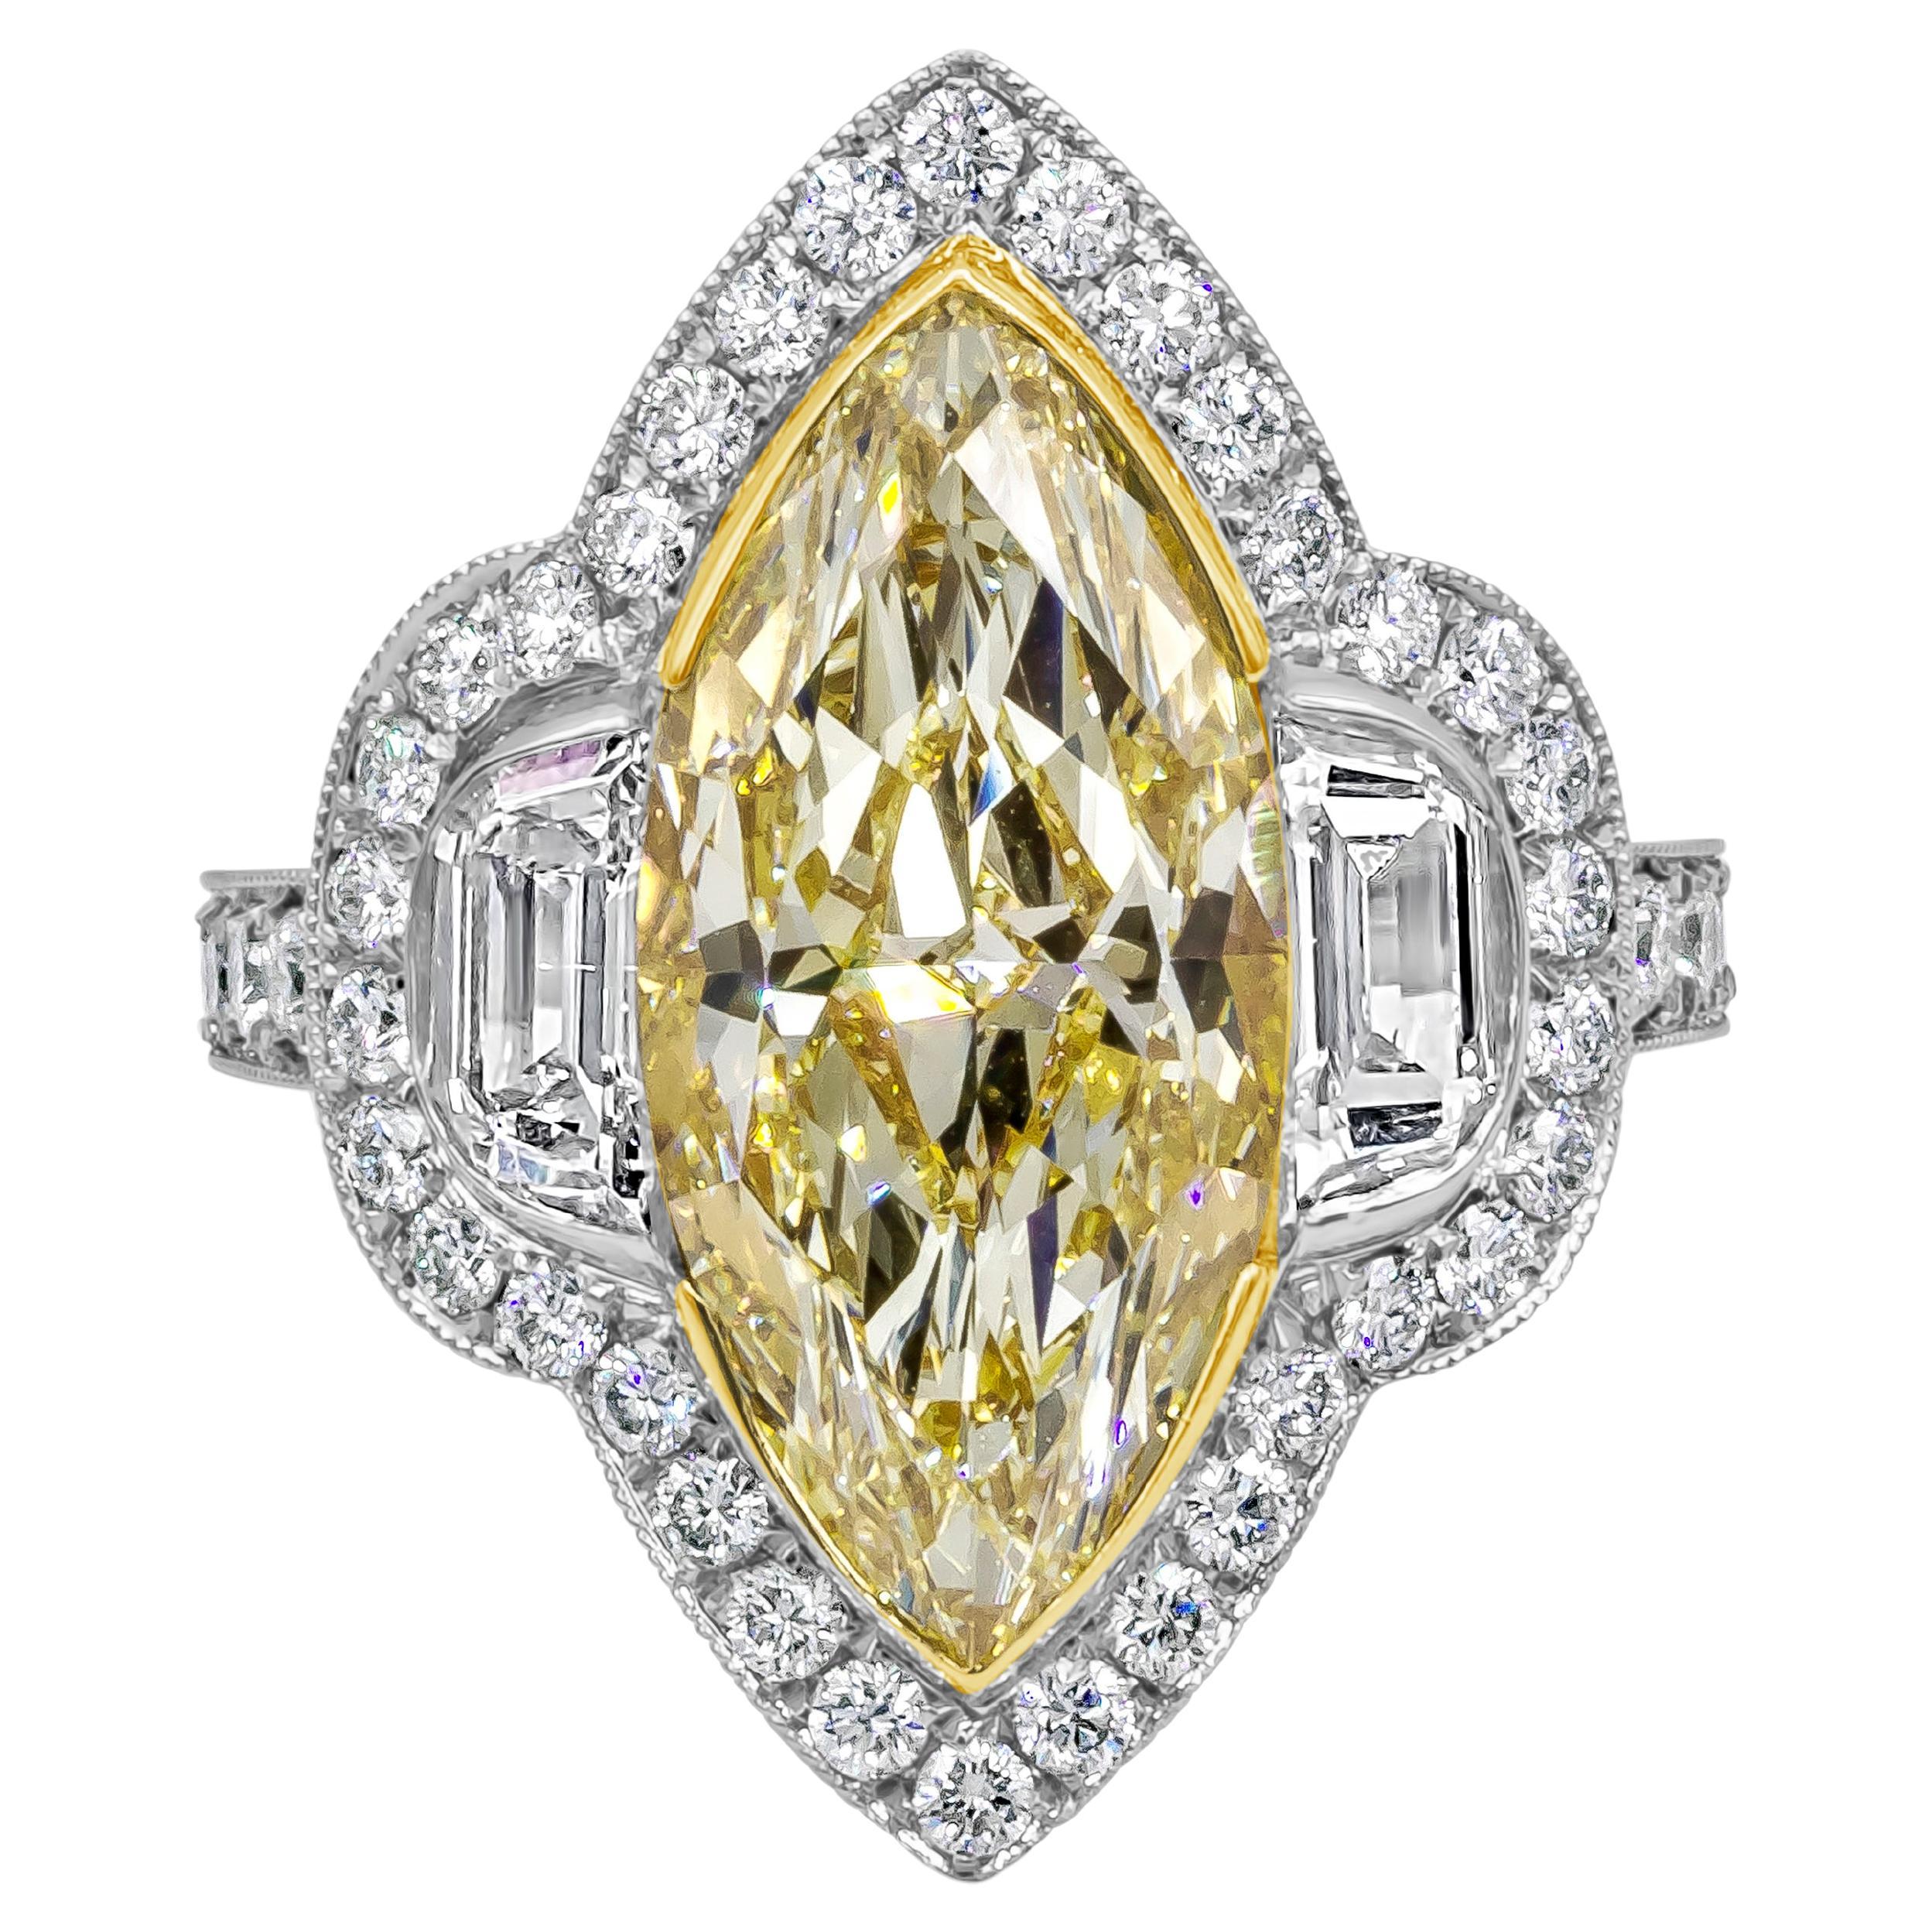 GIA Certified 5.43 Carat Marquise Cut Yellow Diamond Halo Engagement Ring